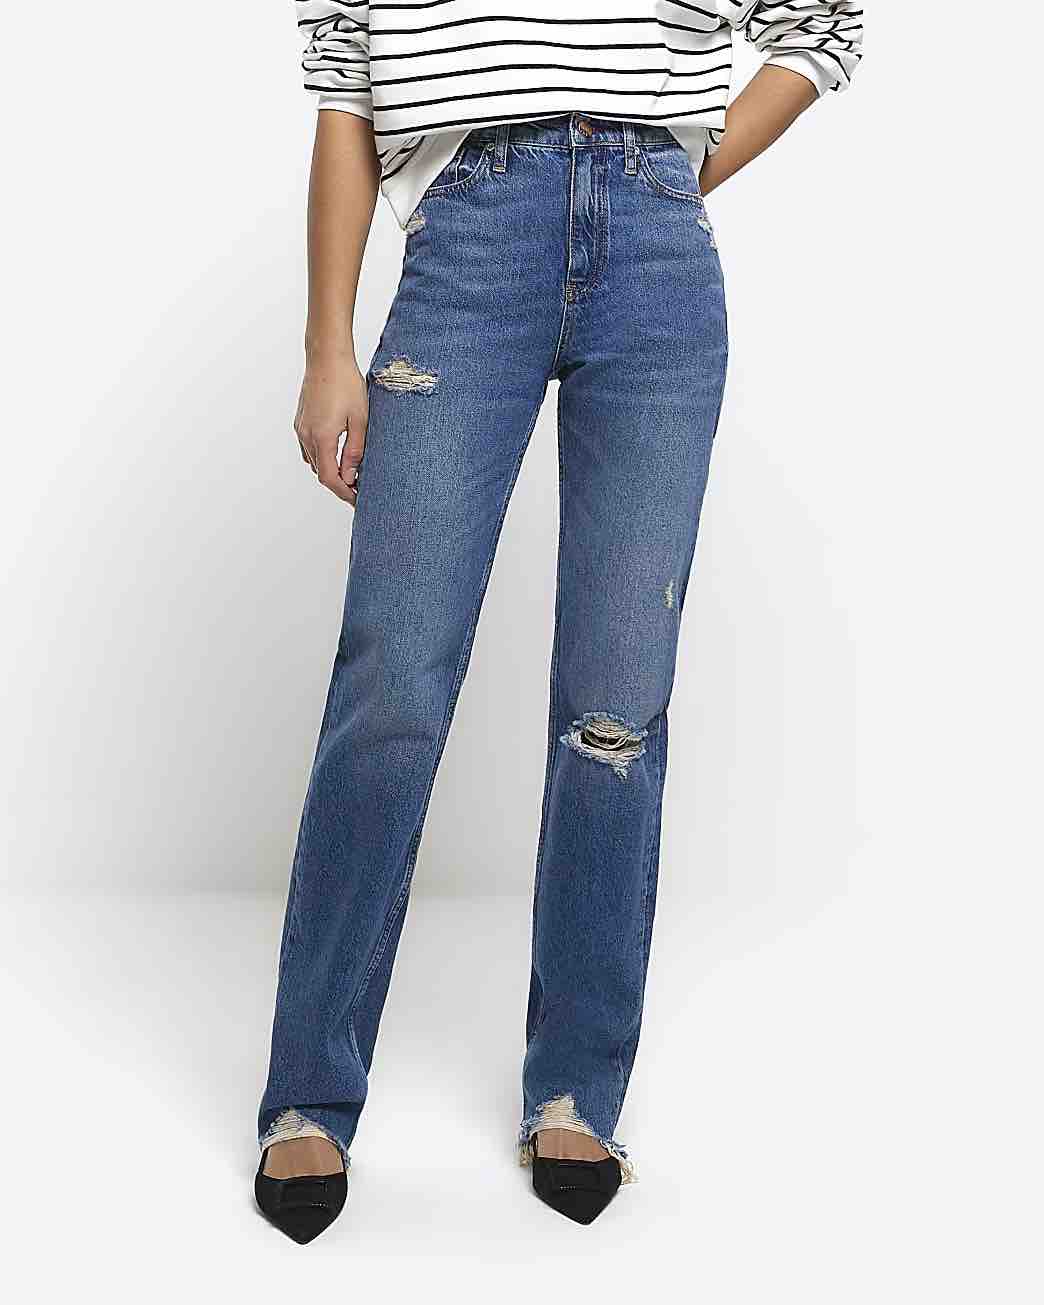 Five Things We Are Loving At River Island Stovepipe Straight Leg Distessed Jeans must have jeans for winter affordable distressed jeans must have dark wash jeans for winter personal stylists share must have pieces for your winter closet what to buy for your winter closet